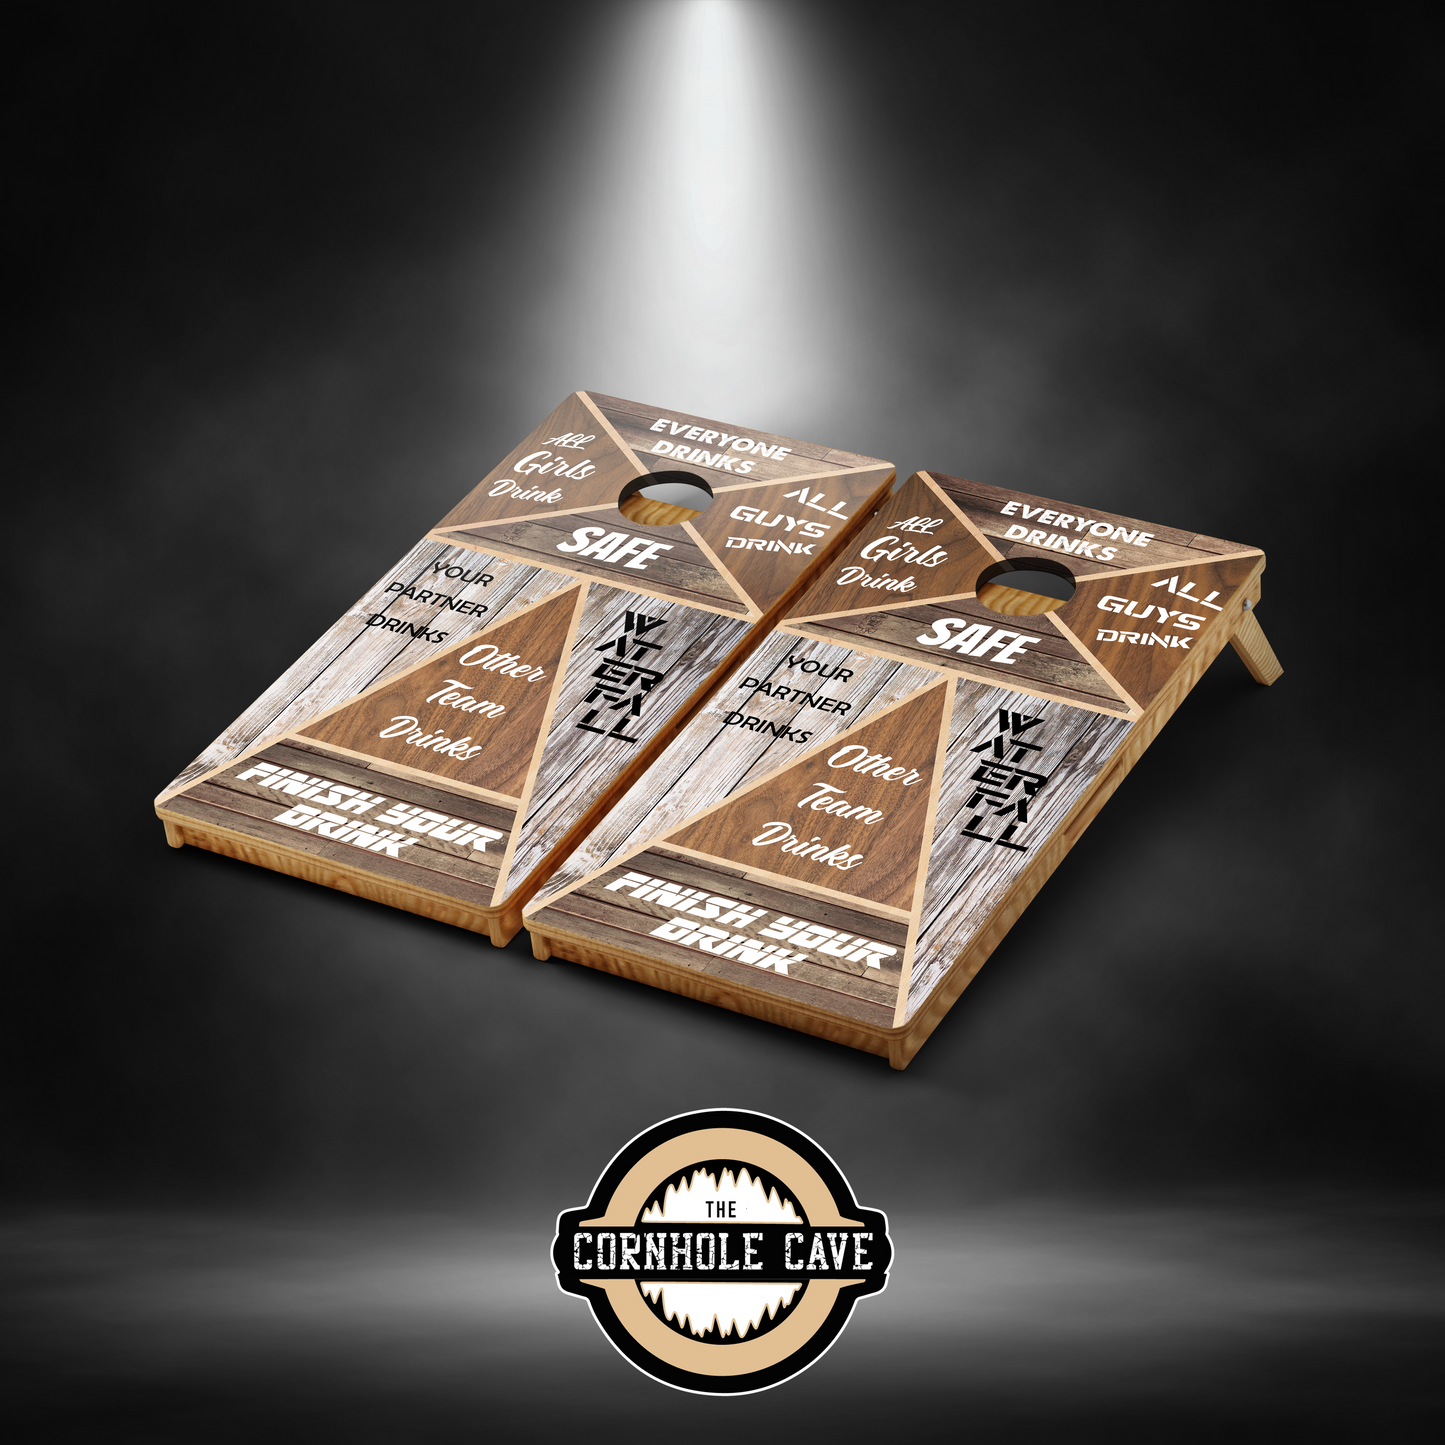 ProToss Cornhole Boards - 80+ designs available! - Our #1 Best Selling Board